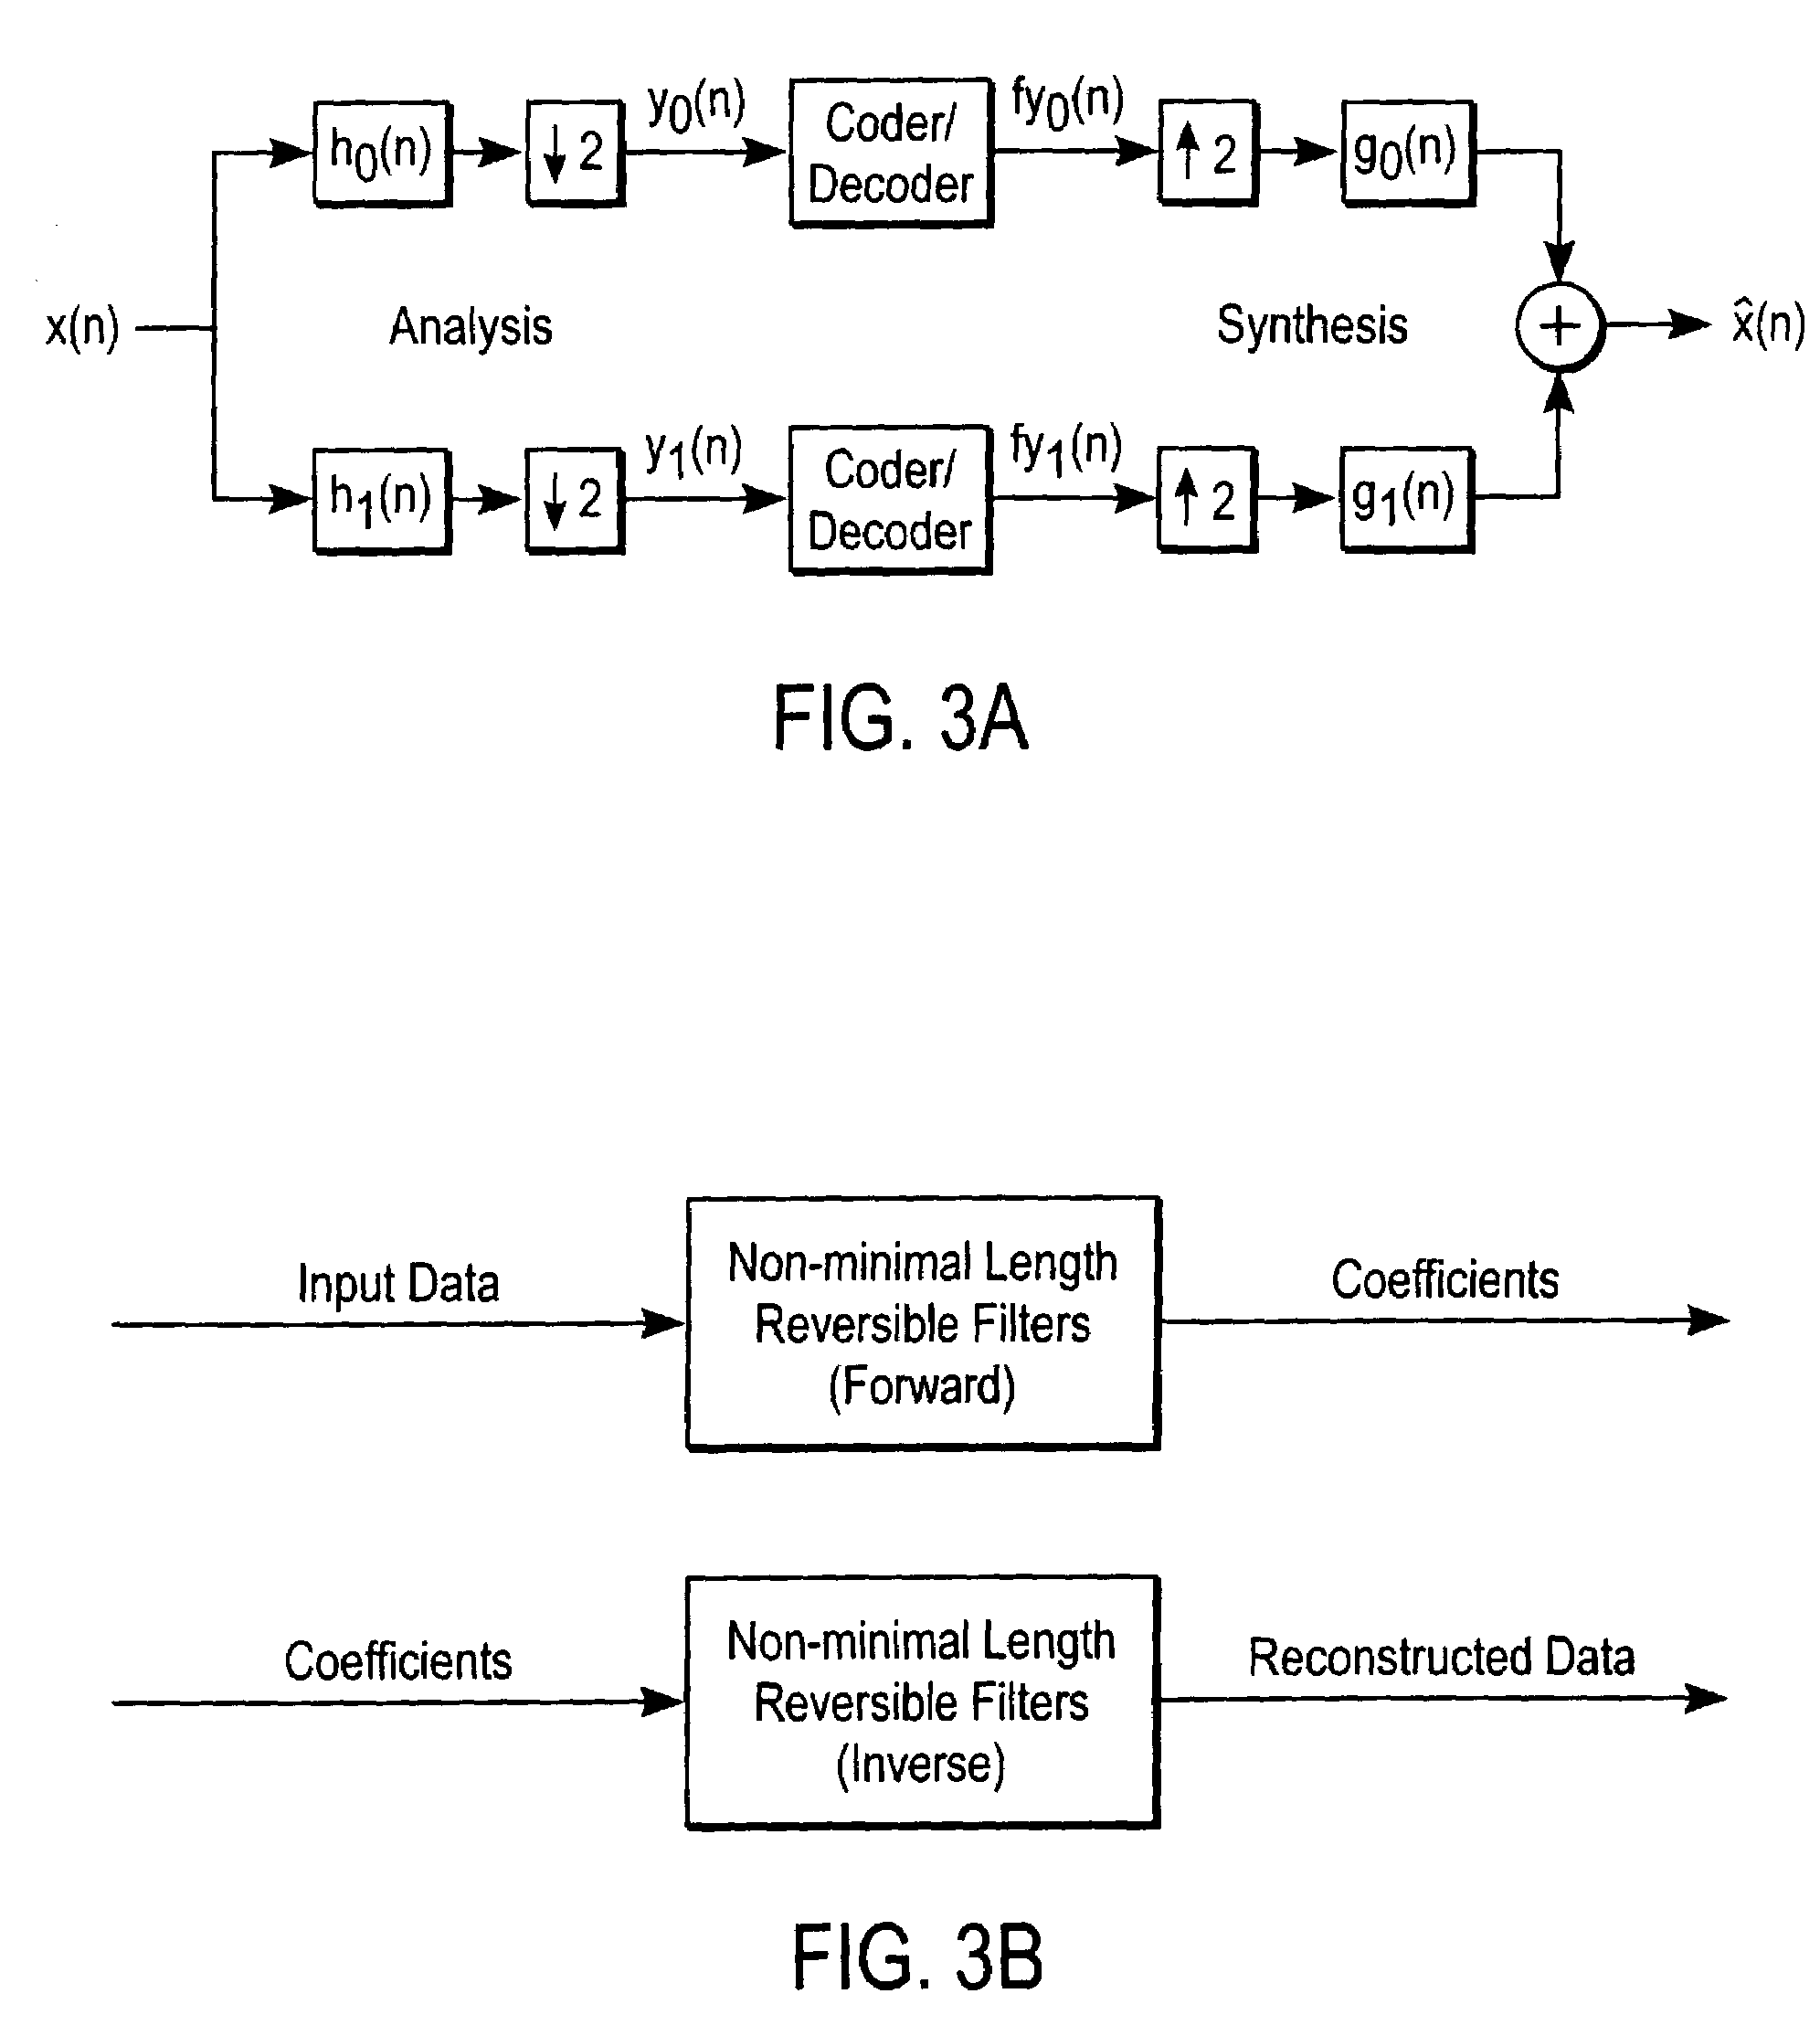 Method and apparatus for compression using reversible wavelet transforms and an embedded codestream